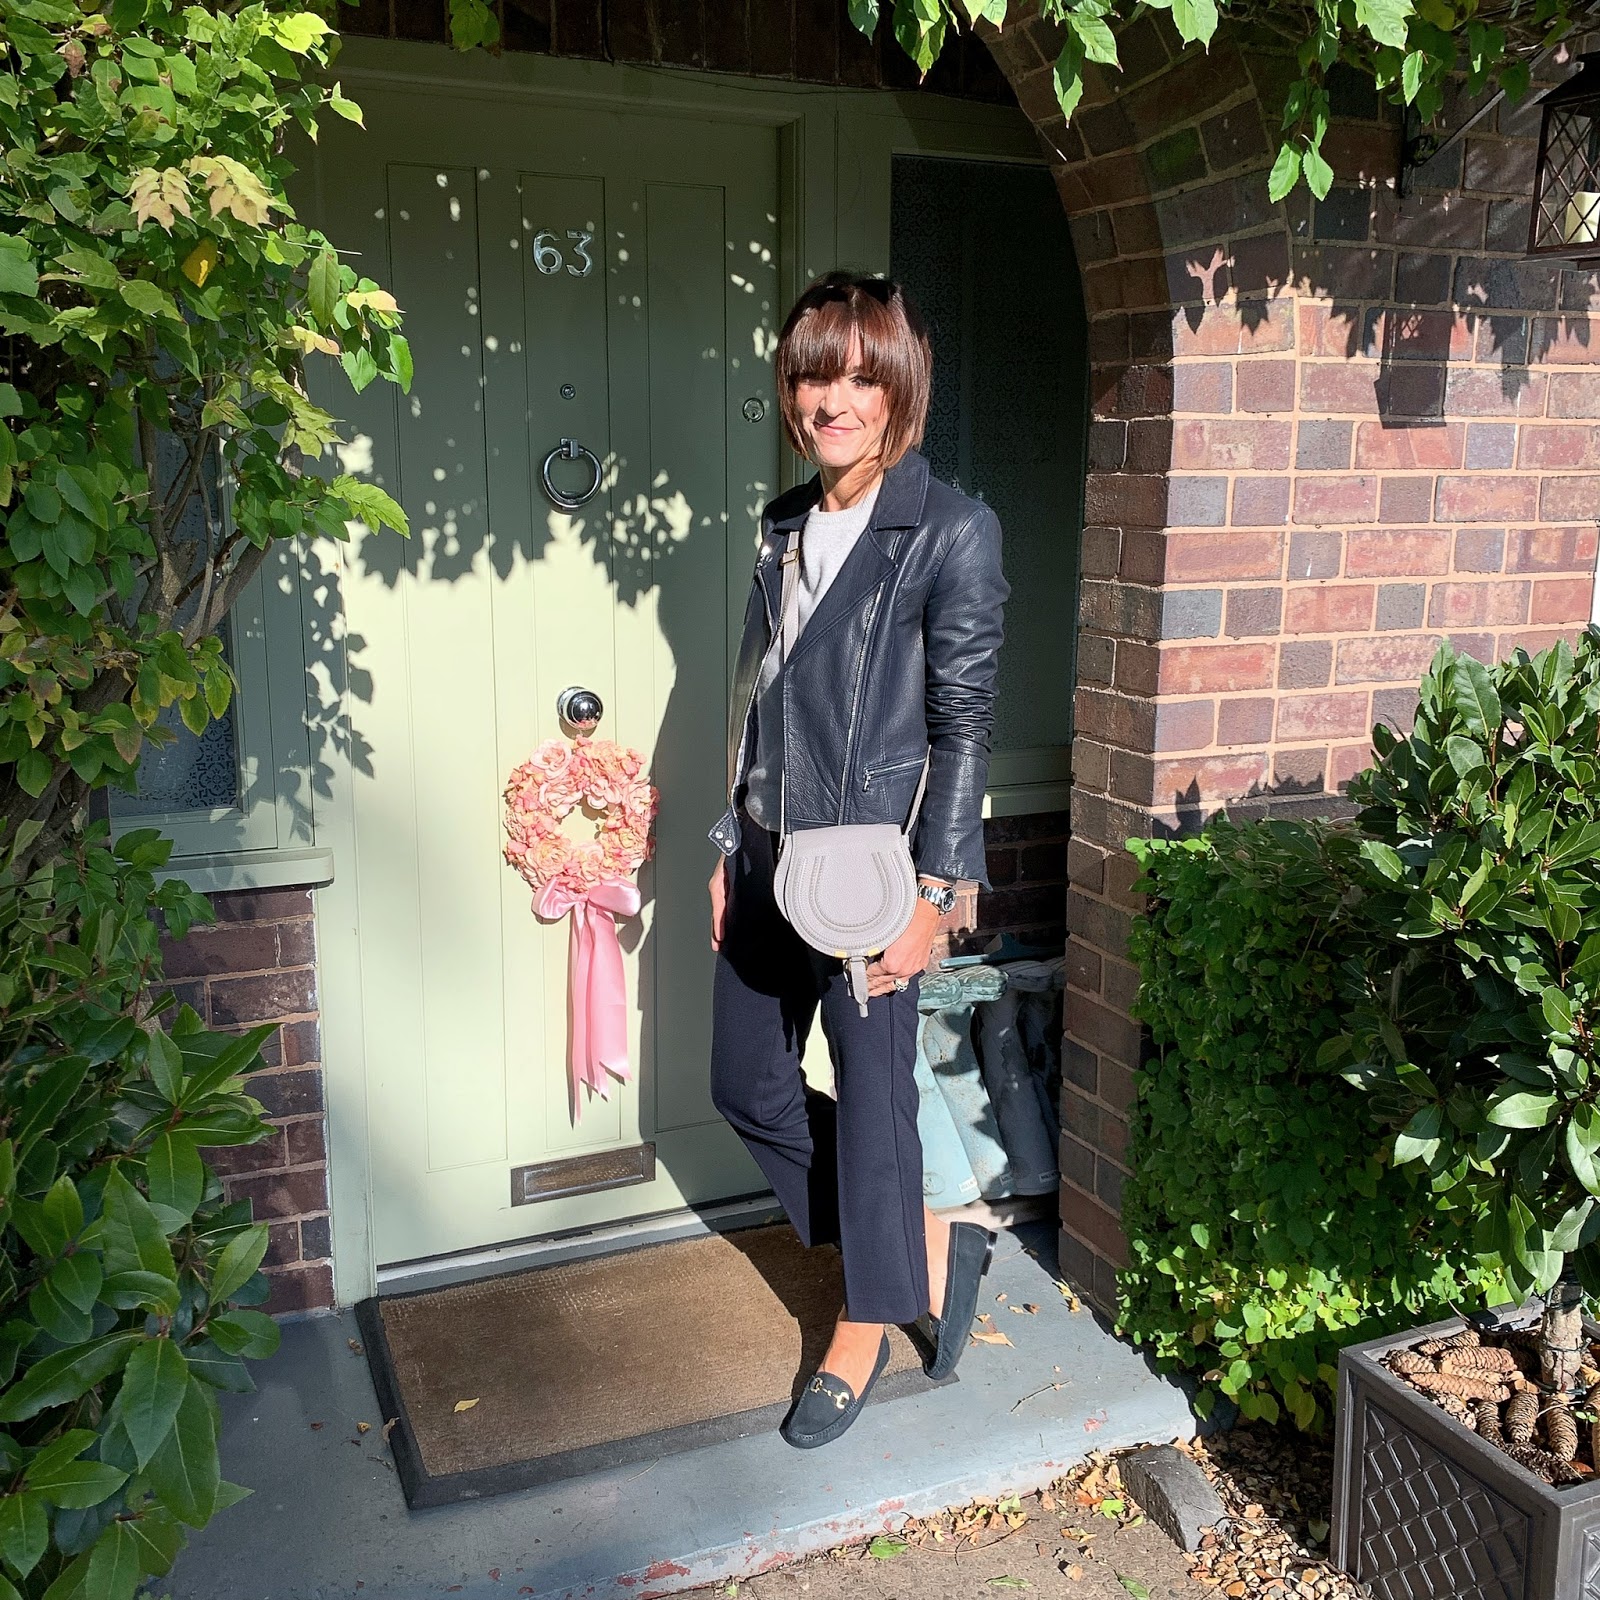 my midlife fashion, massimo dutti leather biker jacket, marks and spencer pure cashmere round neck jumper, chloe marcie small acrossbody bag, j crew cropped kick flare trousers, jones bootmake ella leather flat loafer